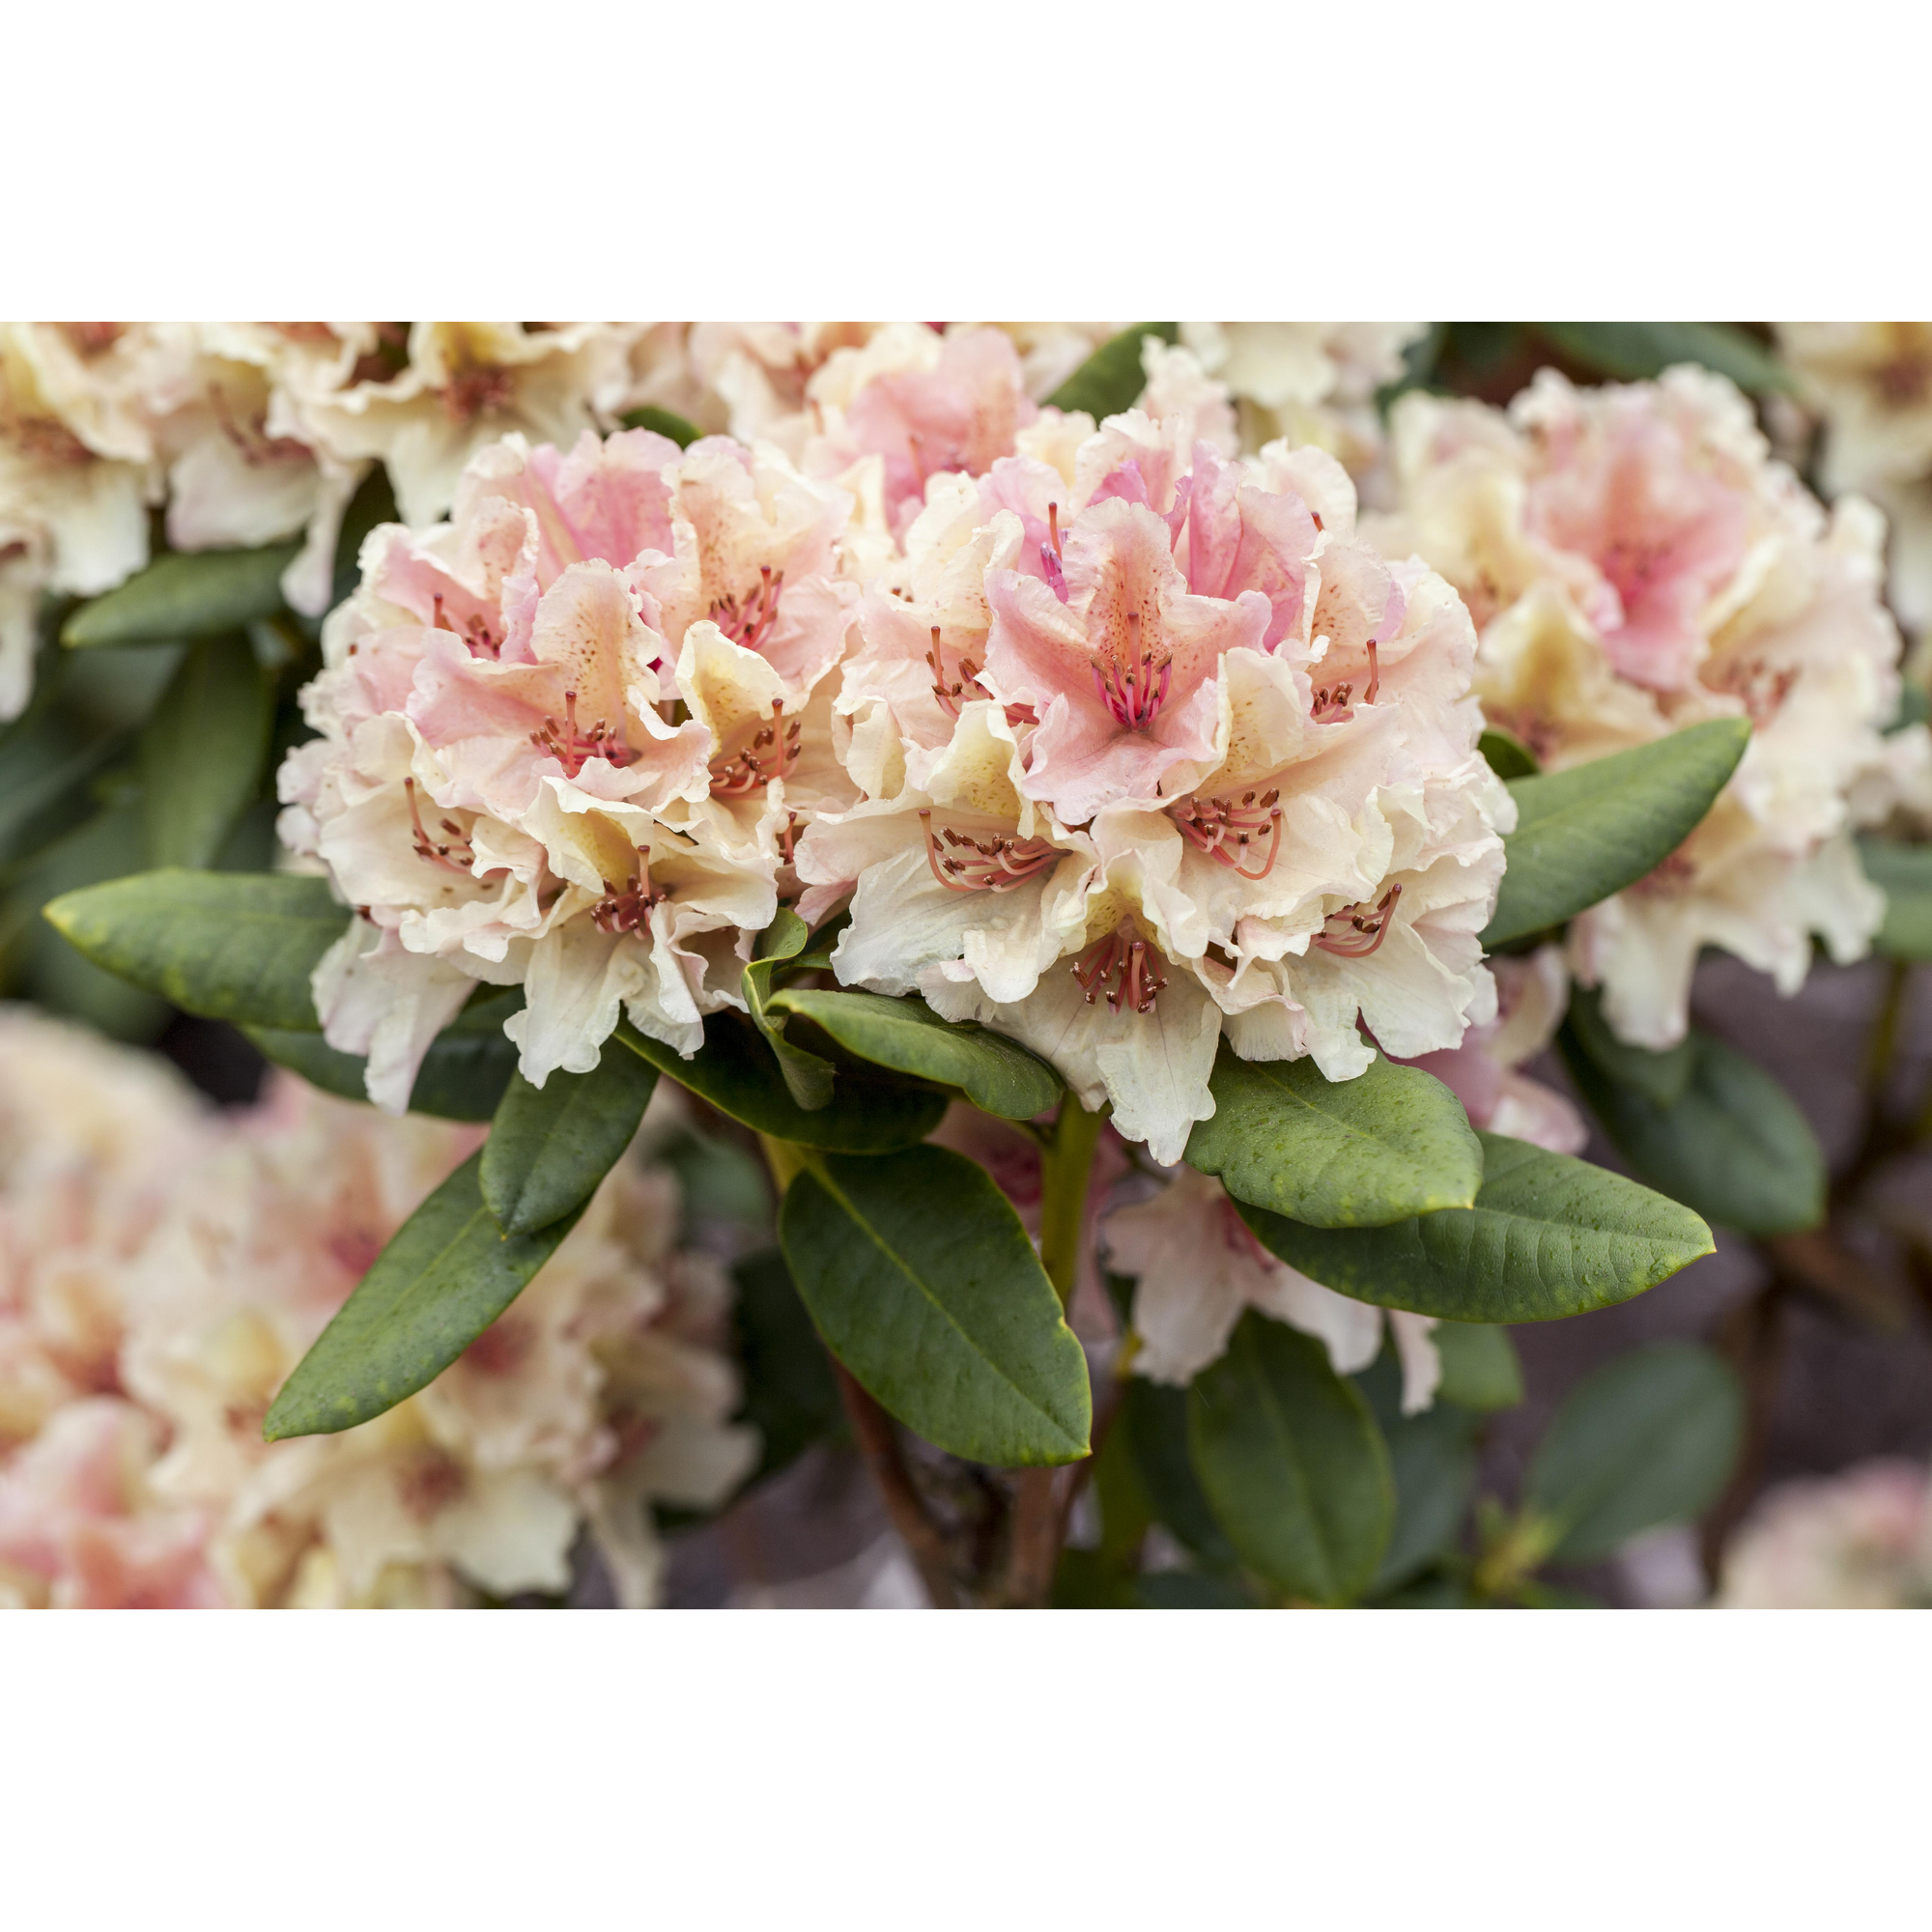 Yakushima-Rhododendron 'Percy Wiseman', 21 cm Topf + product picture